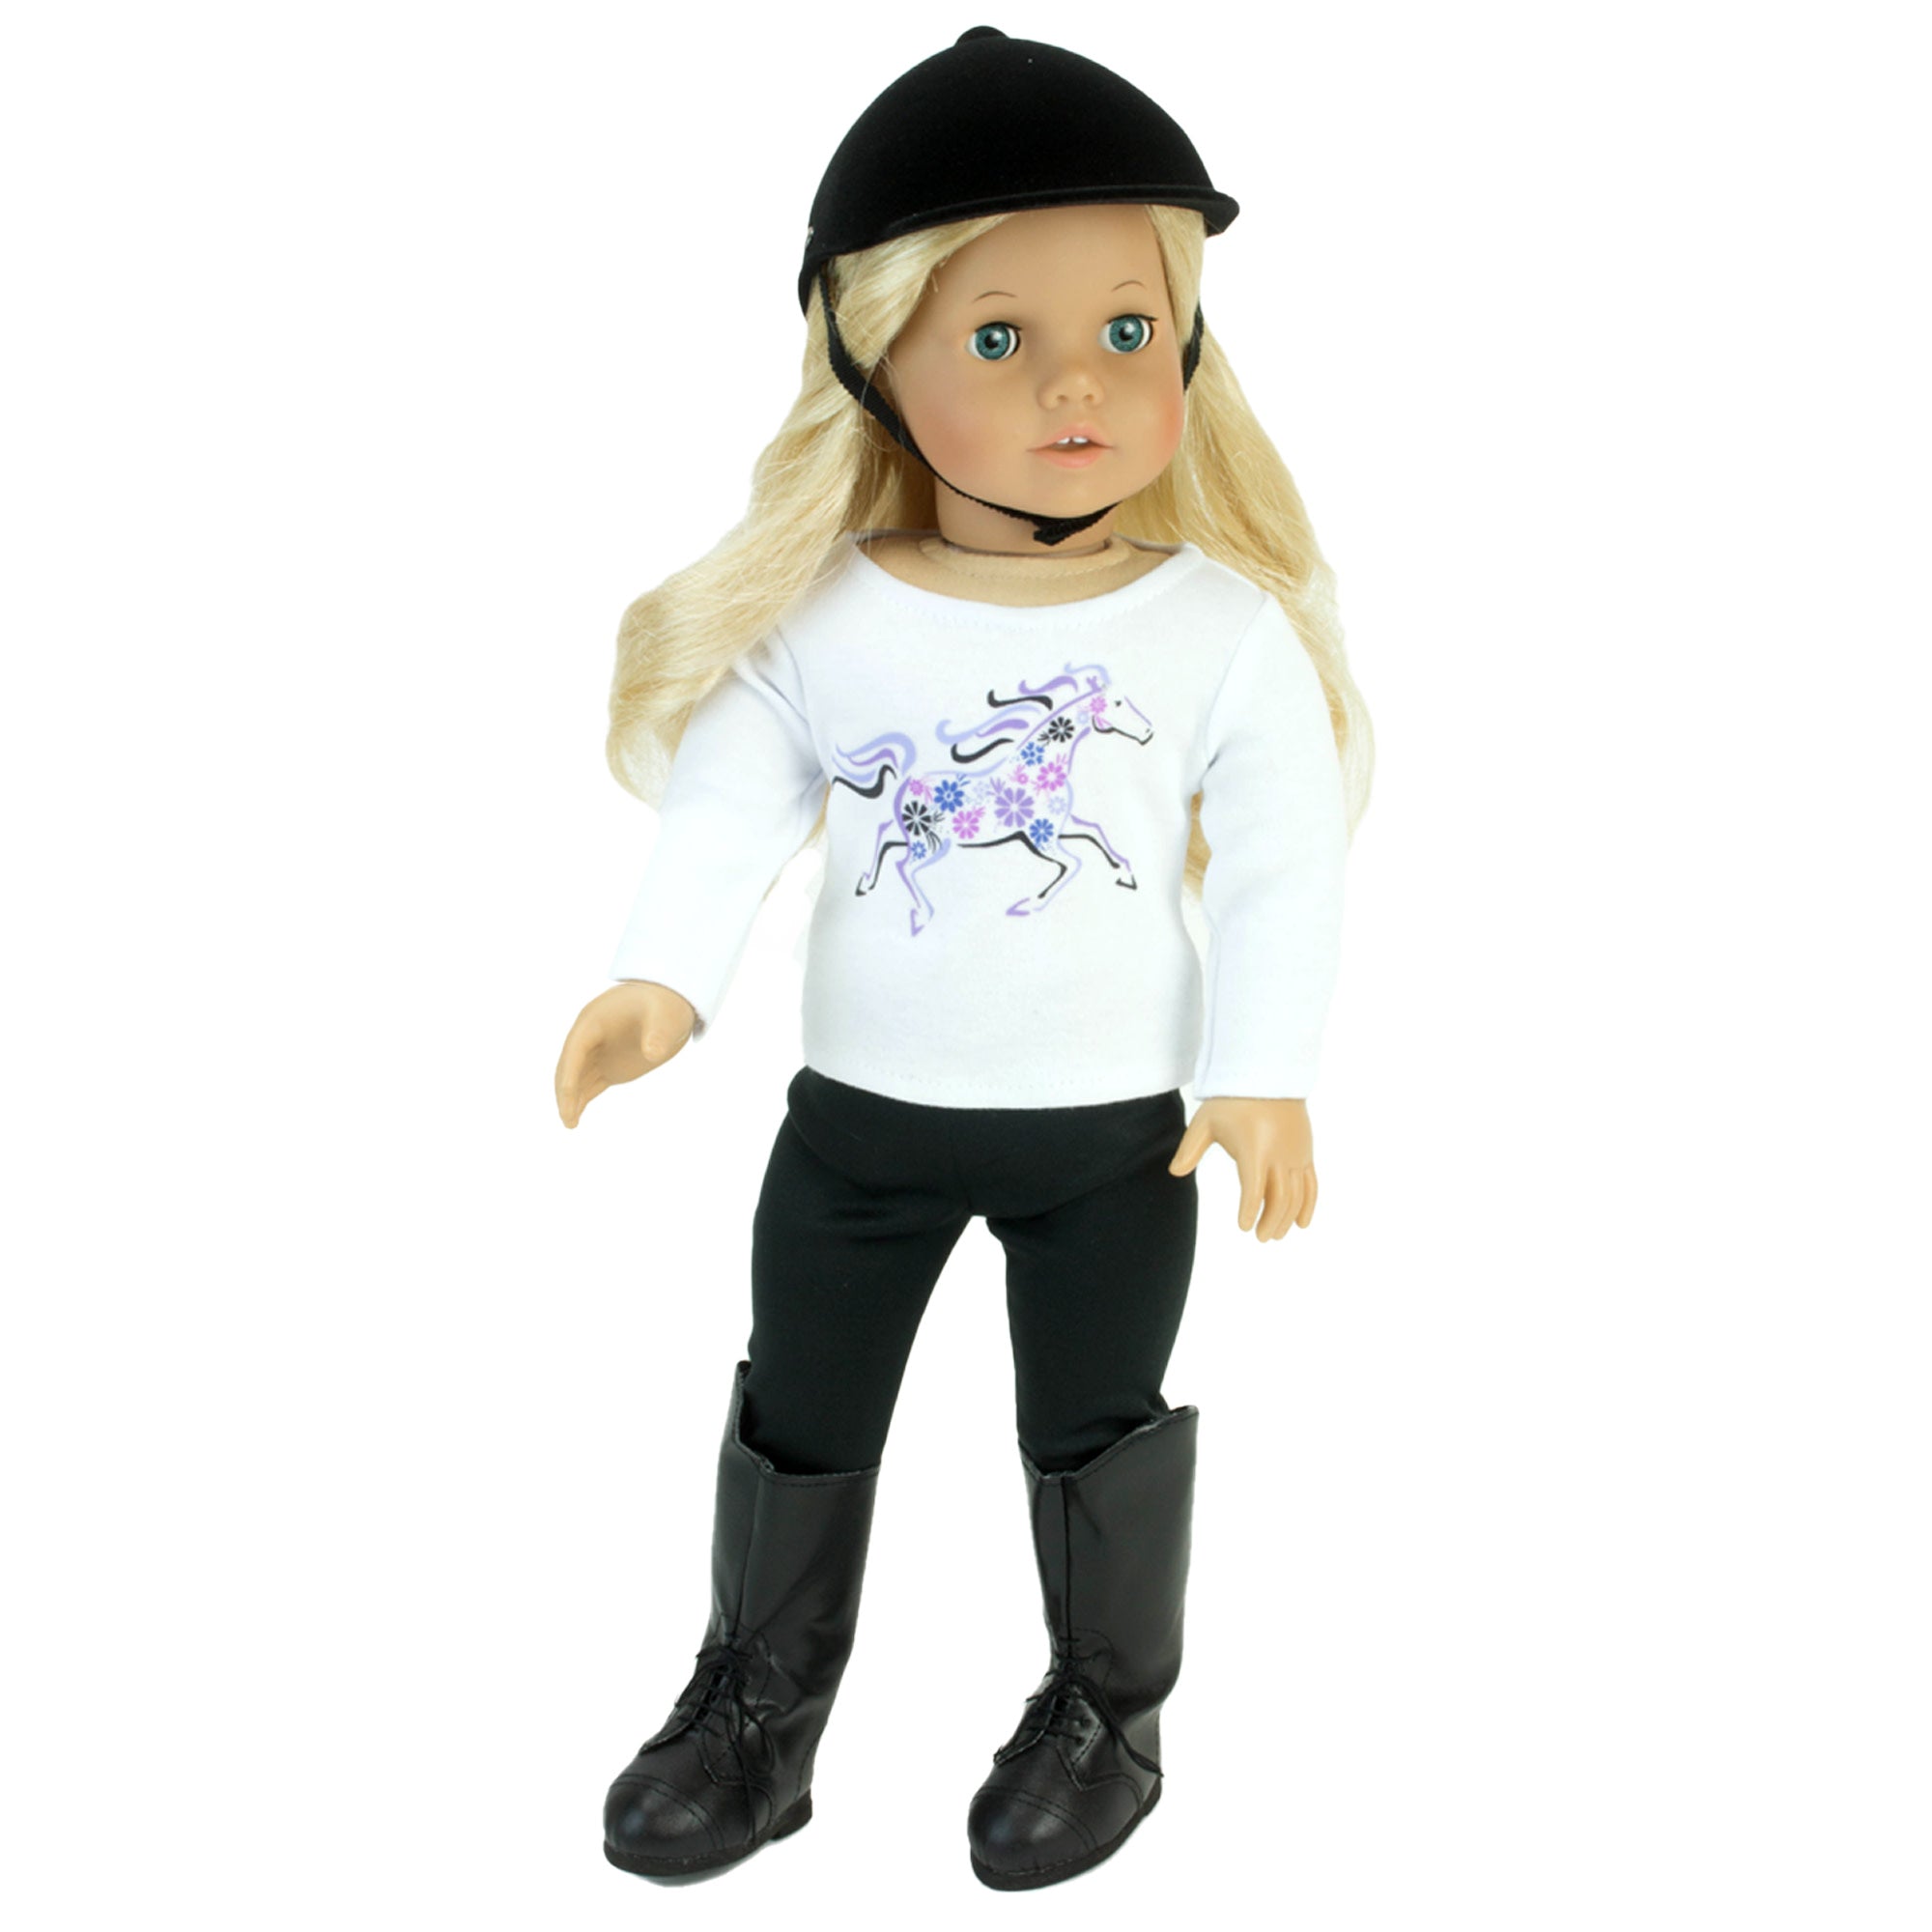 Sophia's 4 Piece Horseback Riding Outfit with Riding Boots Set for 18'' Dolls, Black